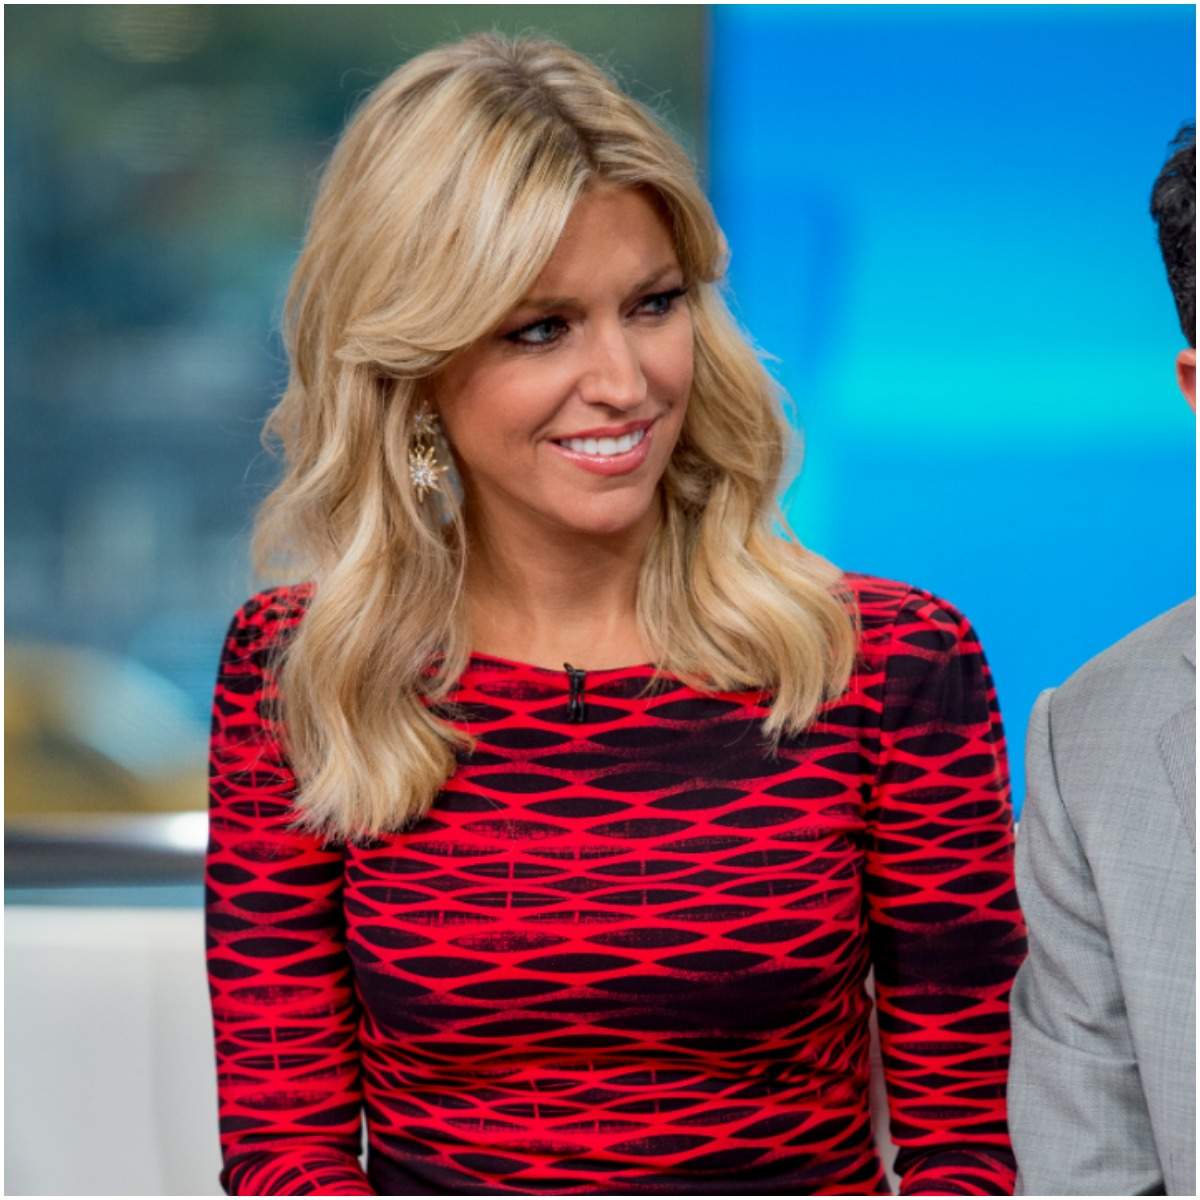 Is Ainsley Earhardt related to Dale Earnhardt